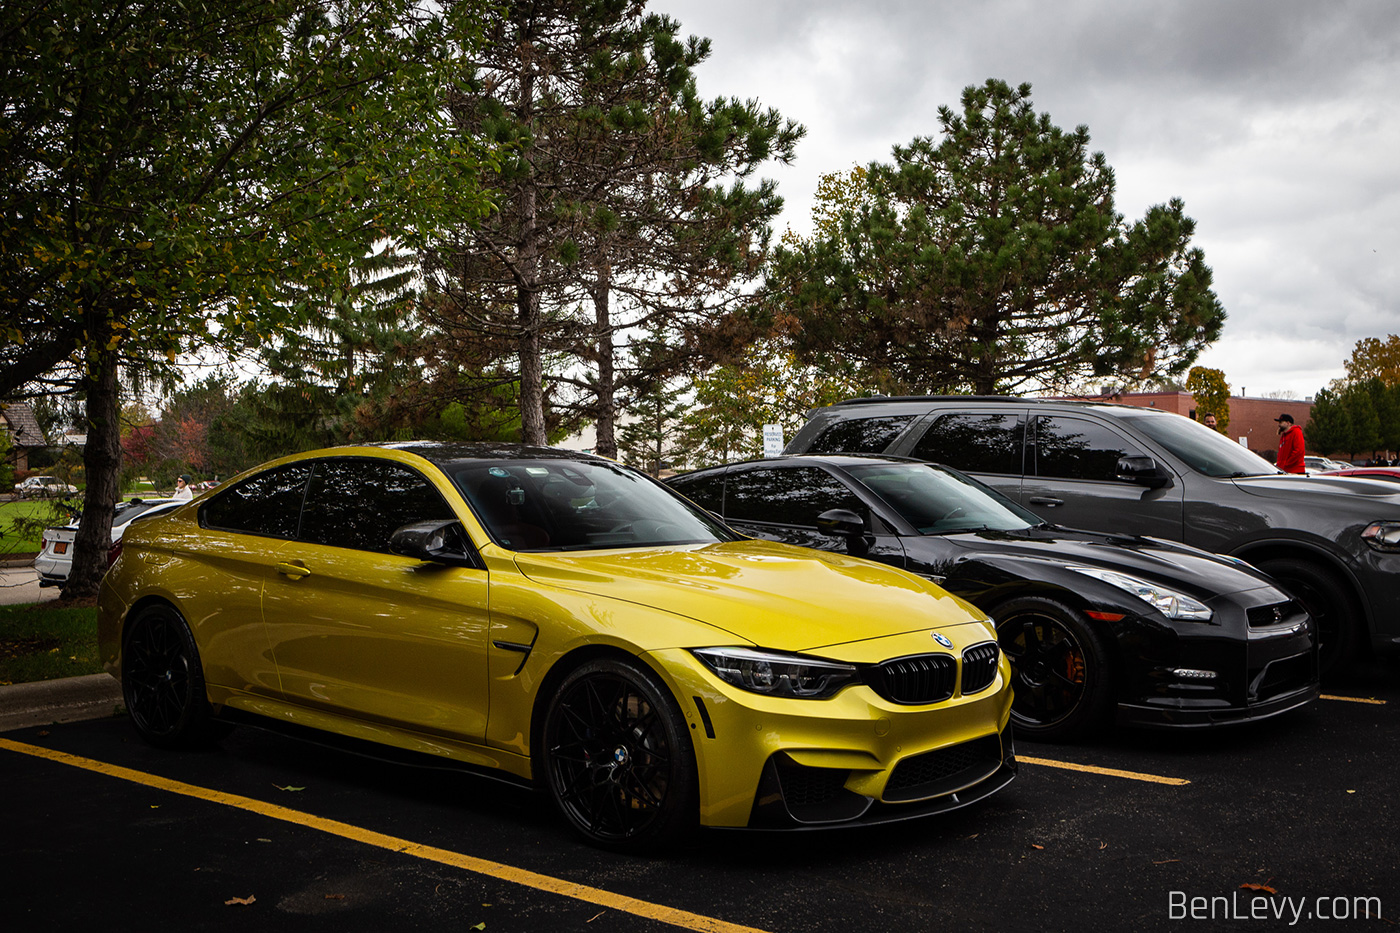 BMW M4 and Nissan GT-R